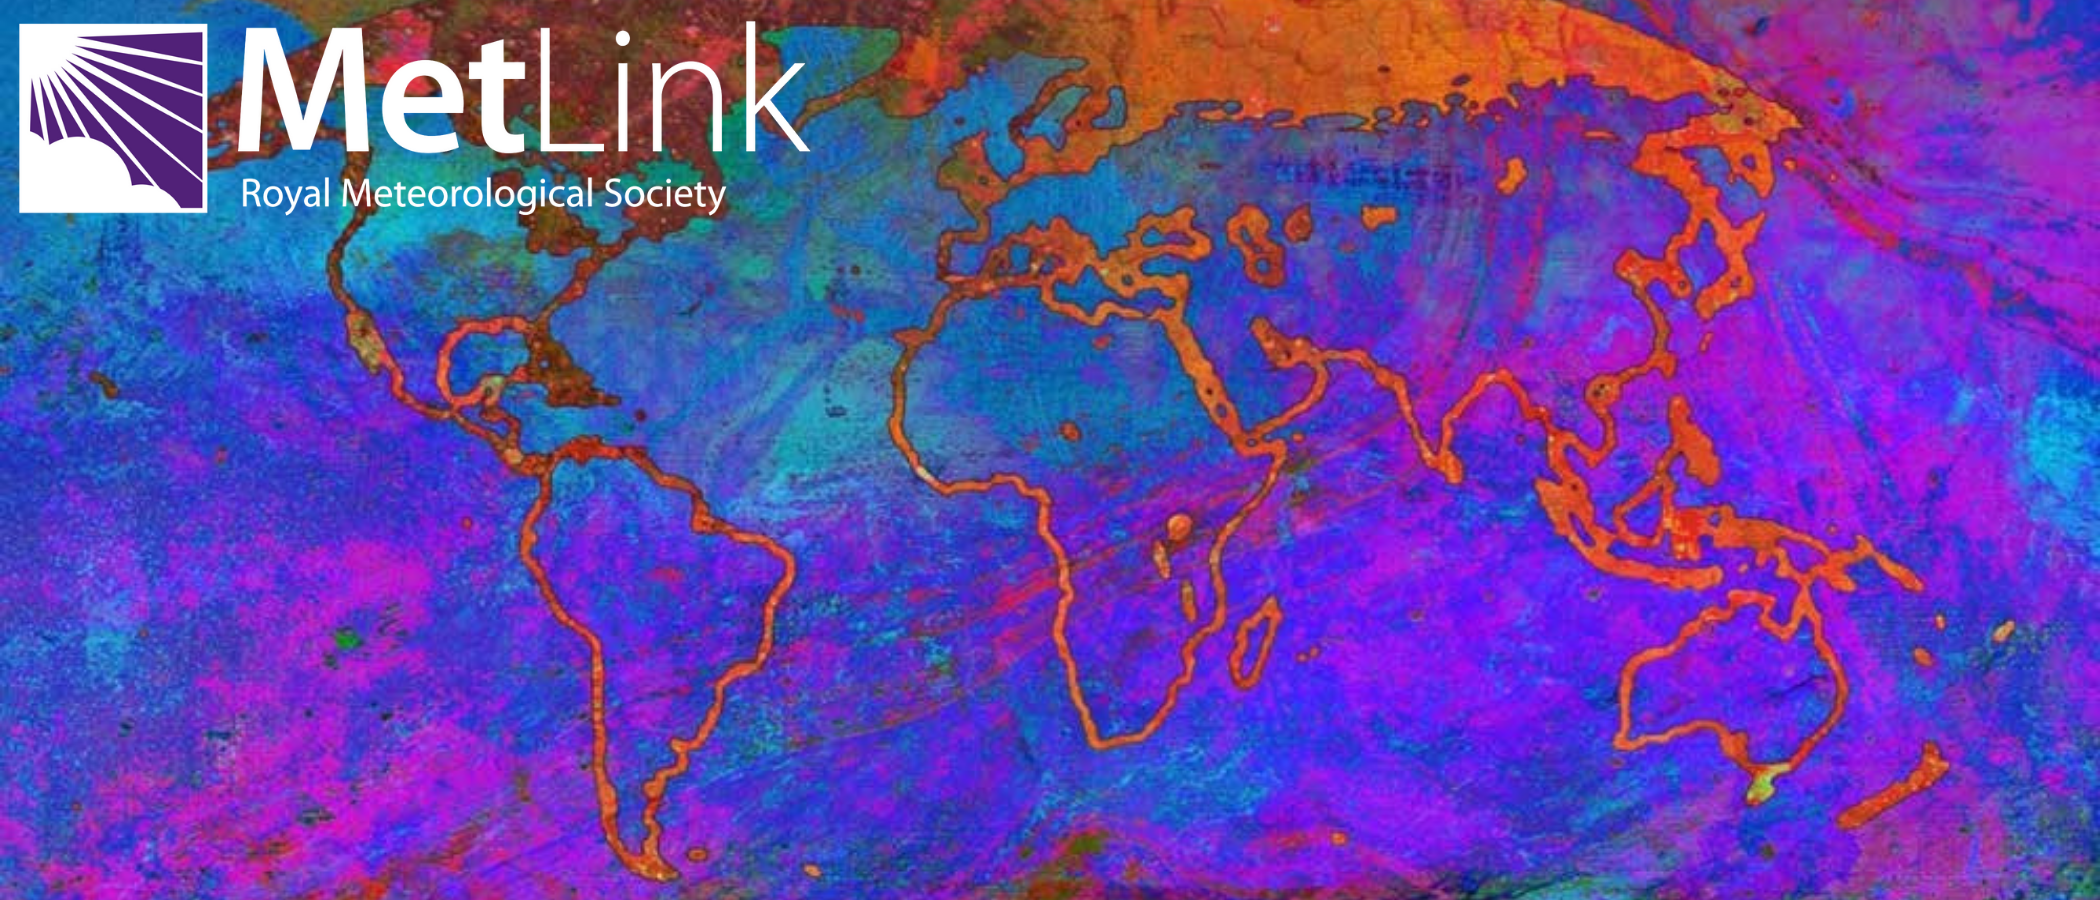 IPCC Report cover image with MetLink logo